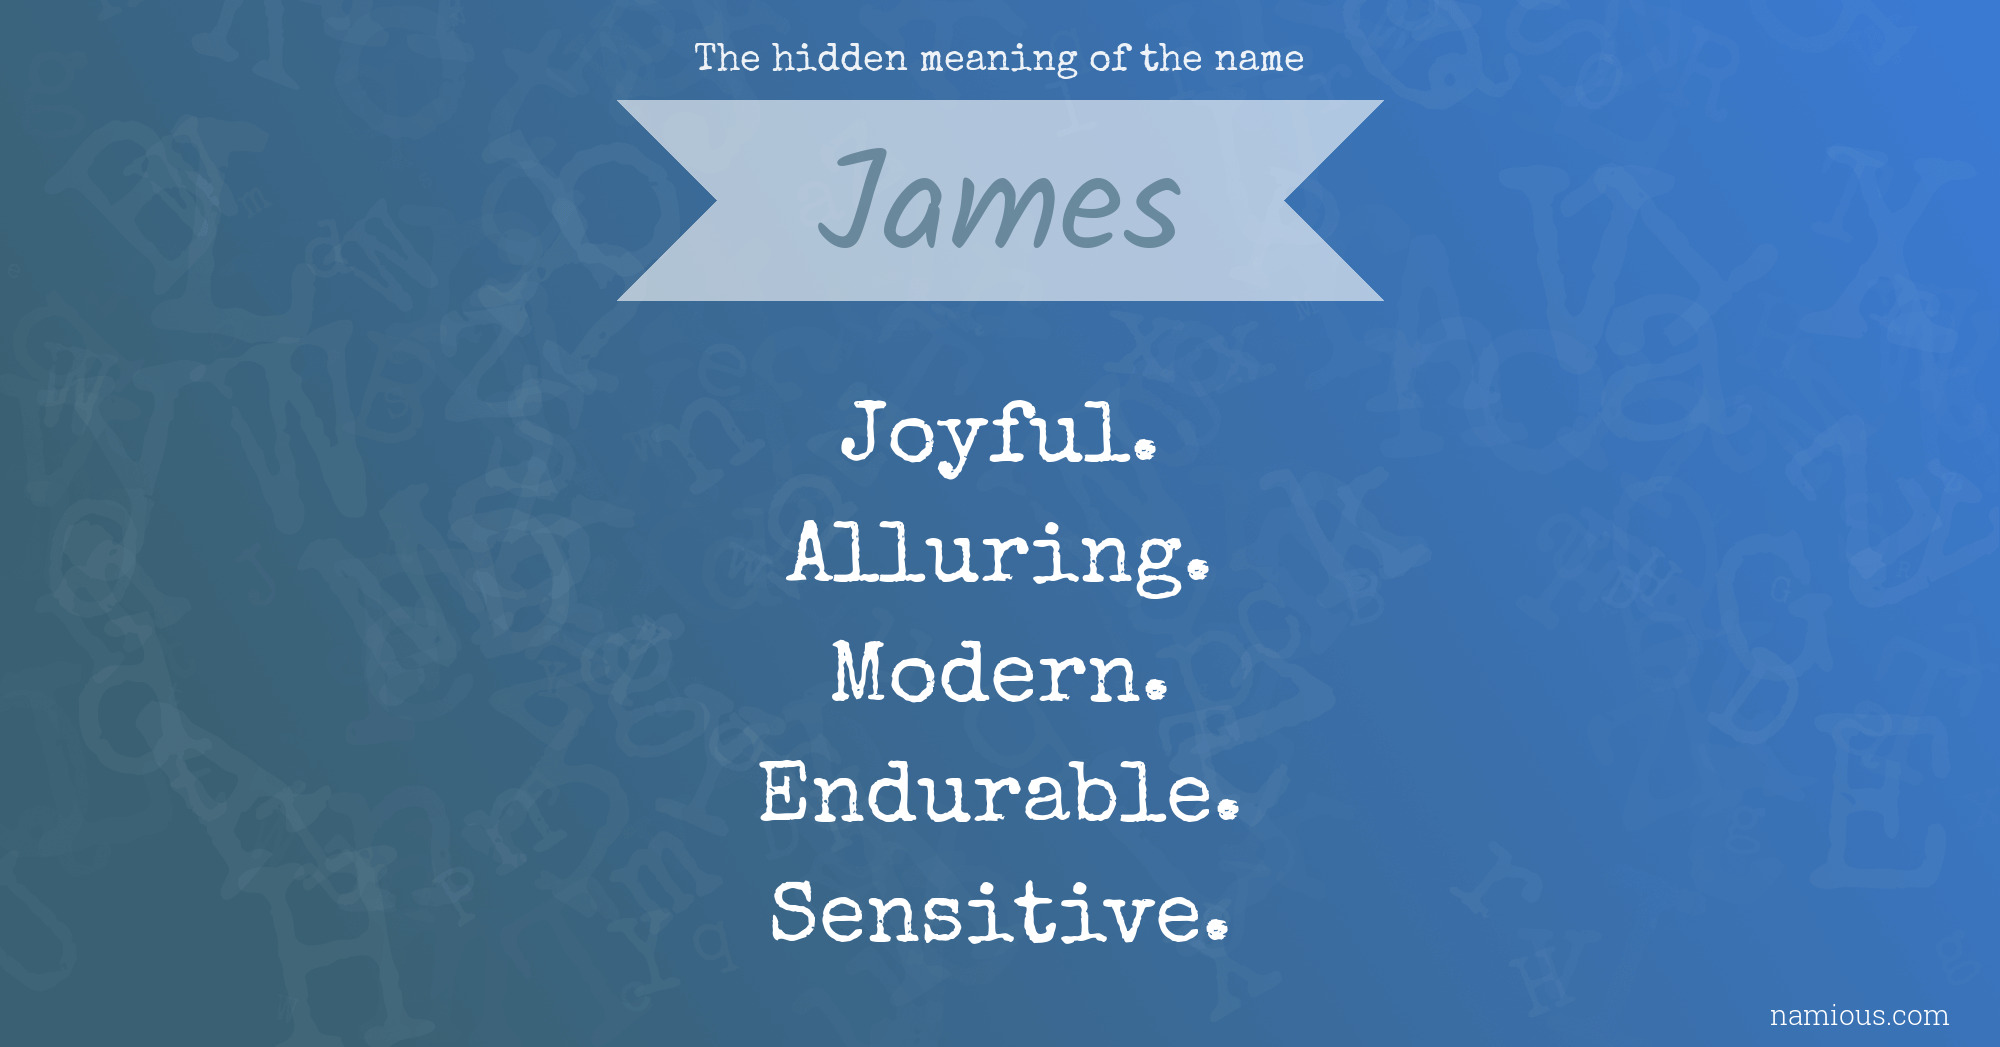 The hidden meaning of the name James